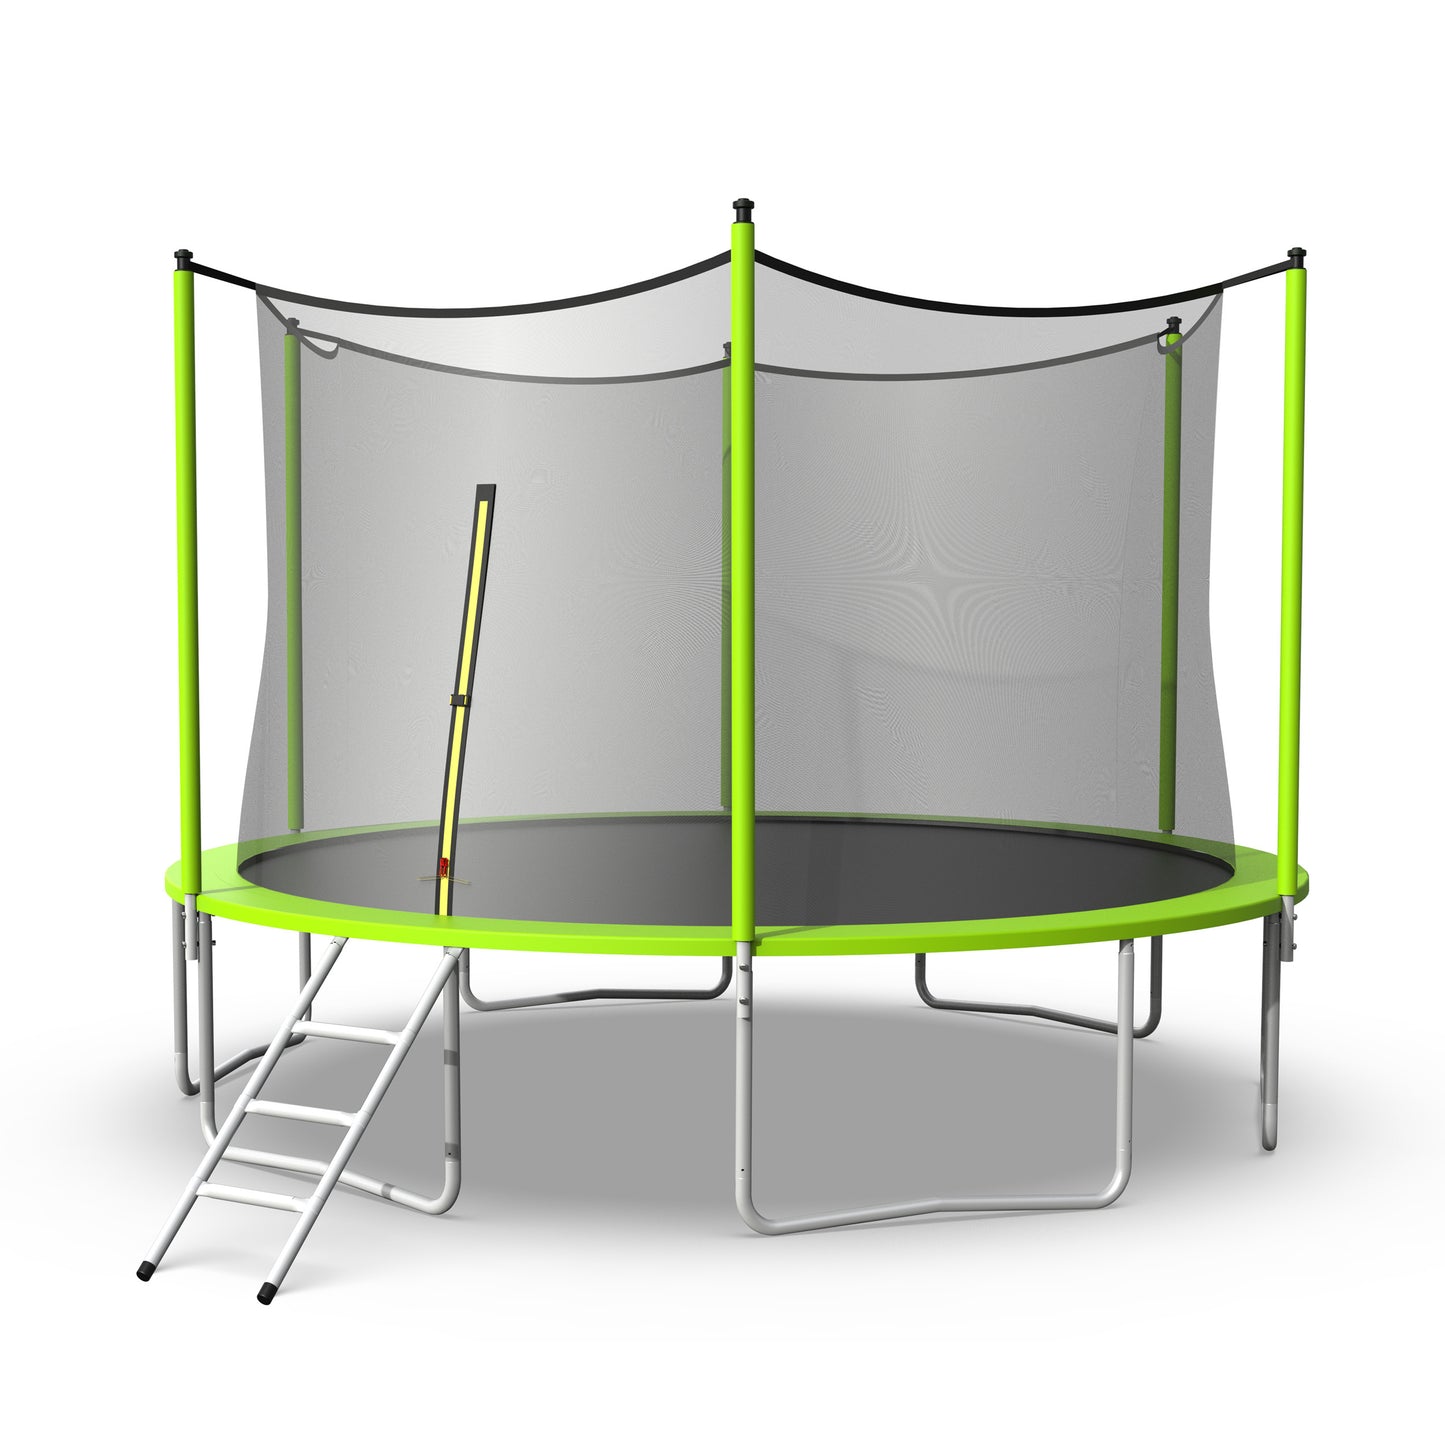 12FT Trampoline with Safety Enclosure Net,Outdoor Fitness Trampoline PVC Spring Cover Padding Exercise Trampoline,Green